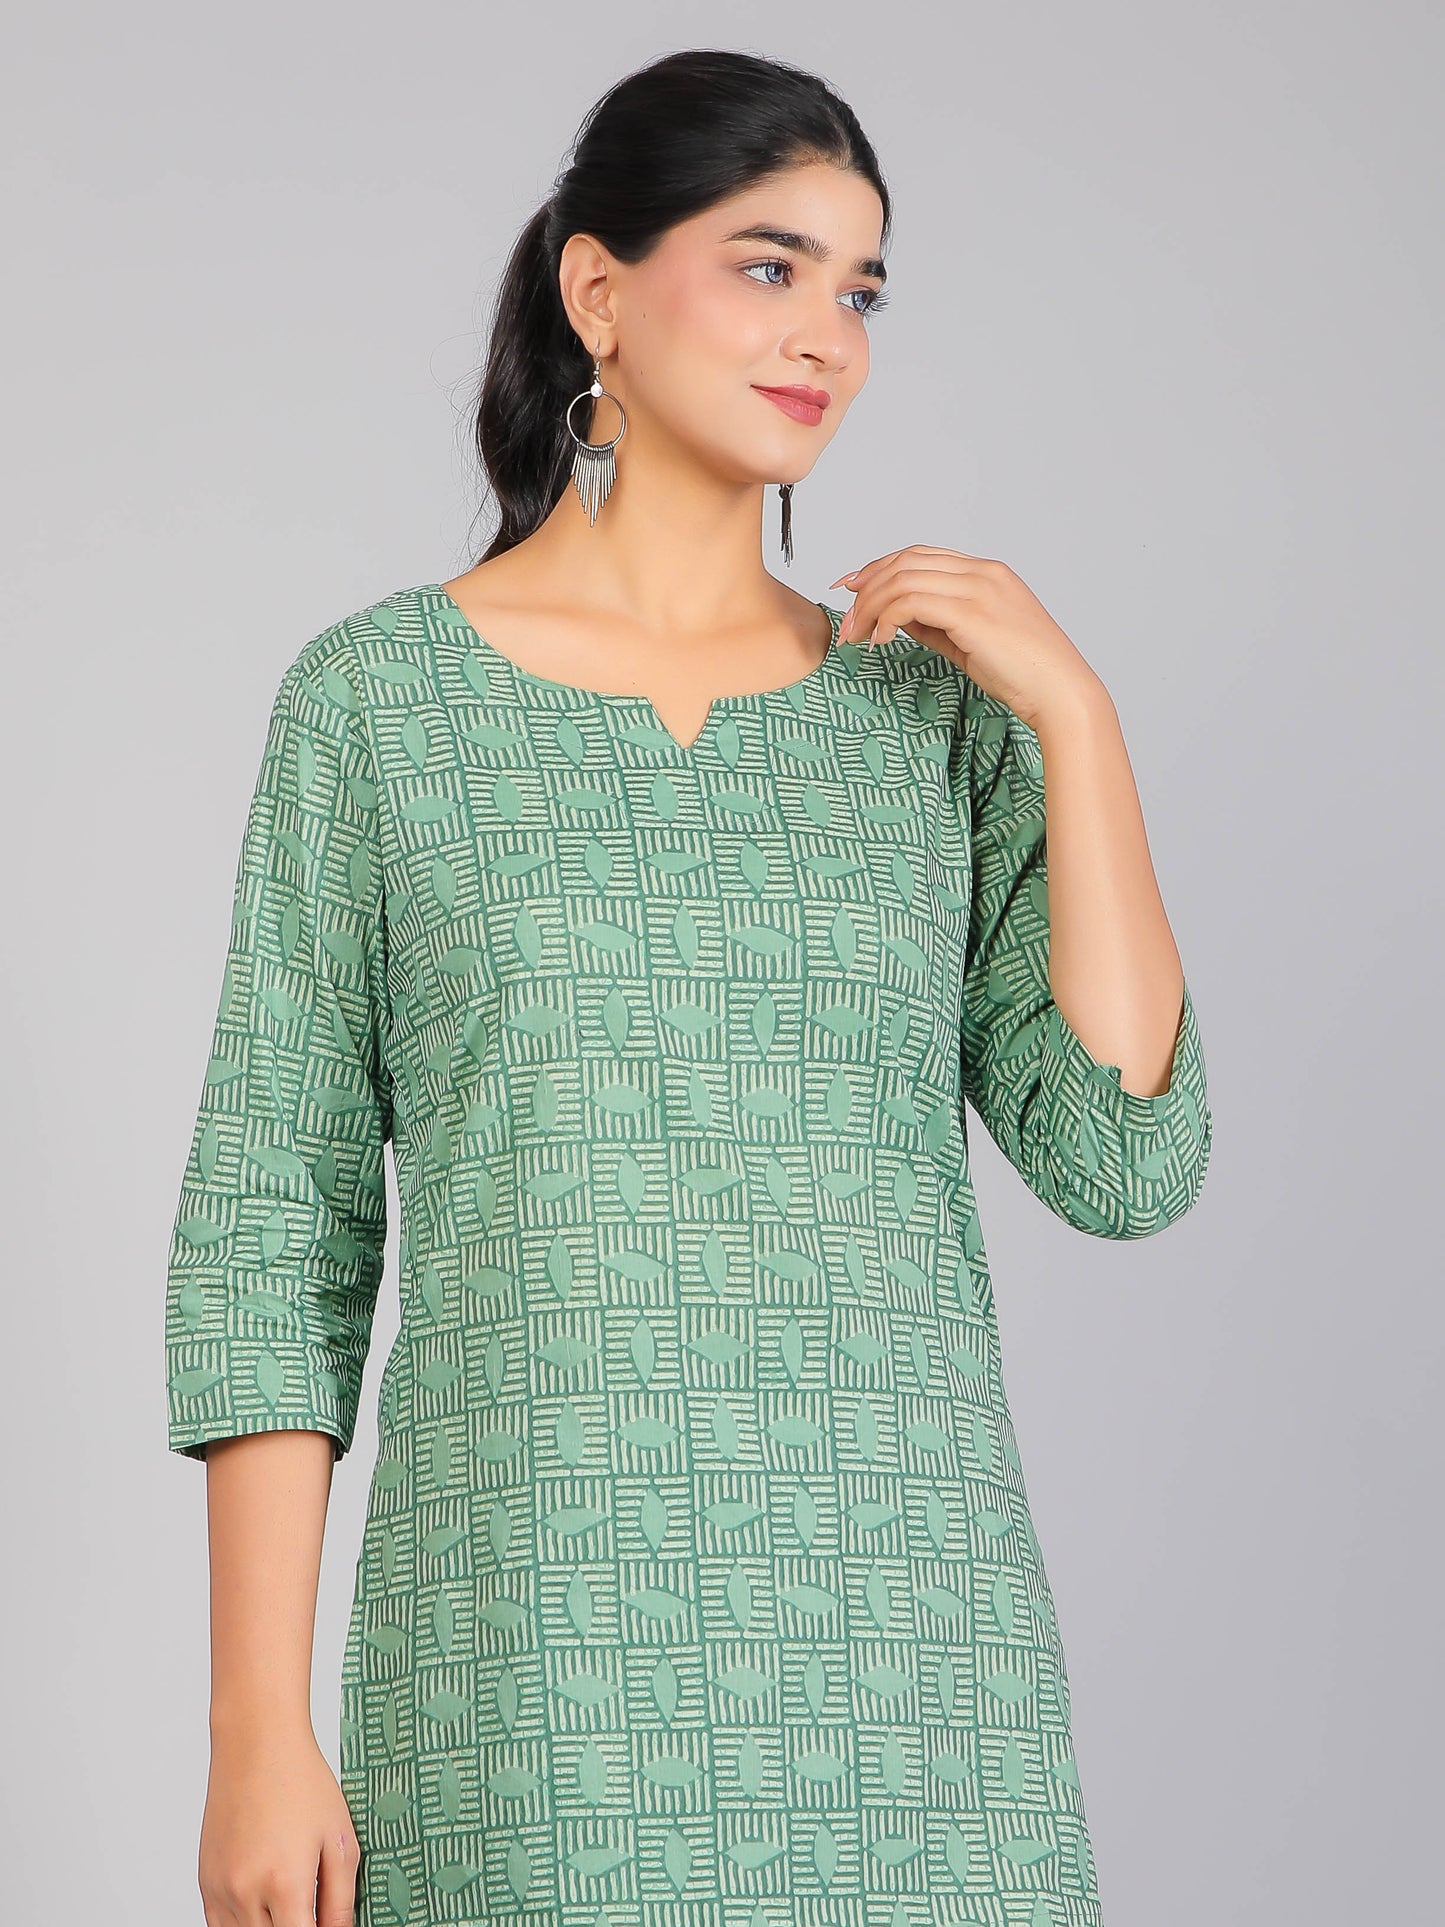 Abstract Print Green Cotton Lounge Set for Women